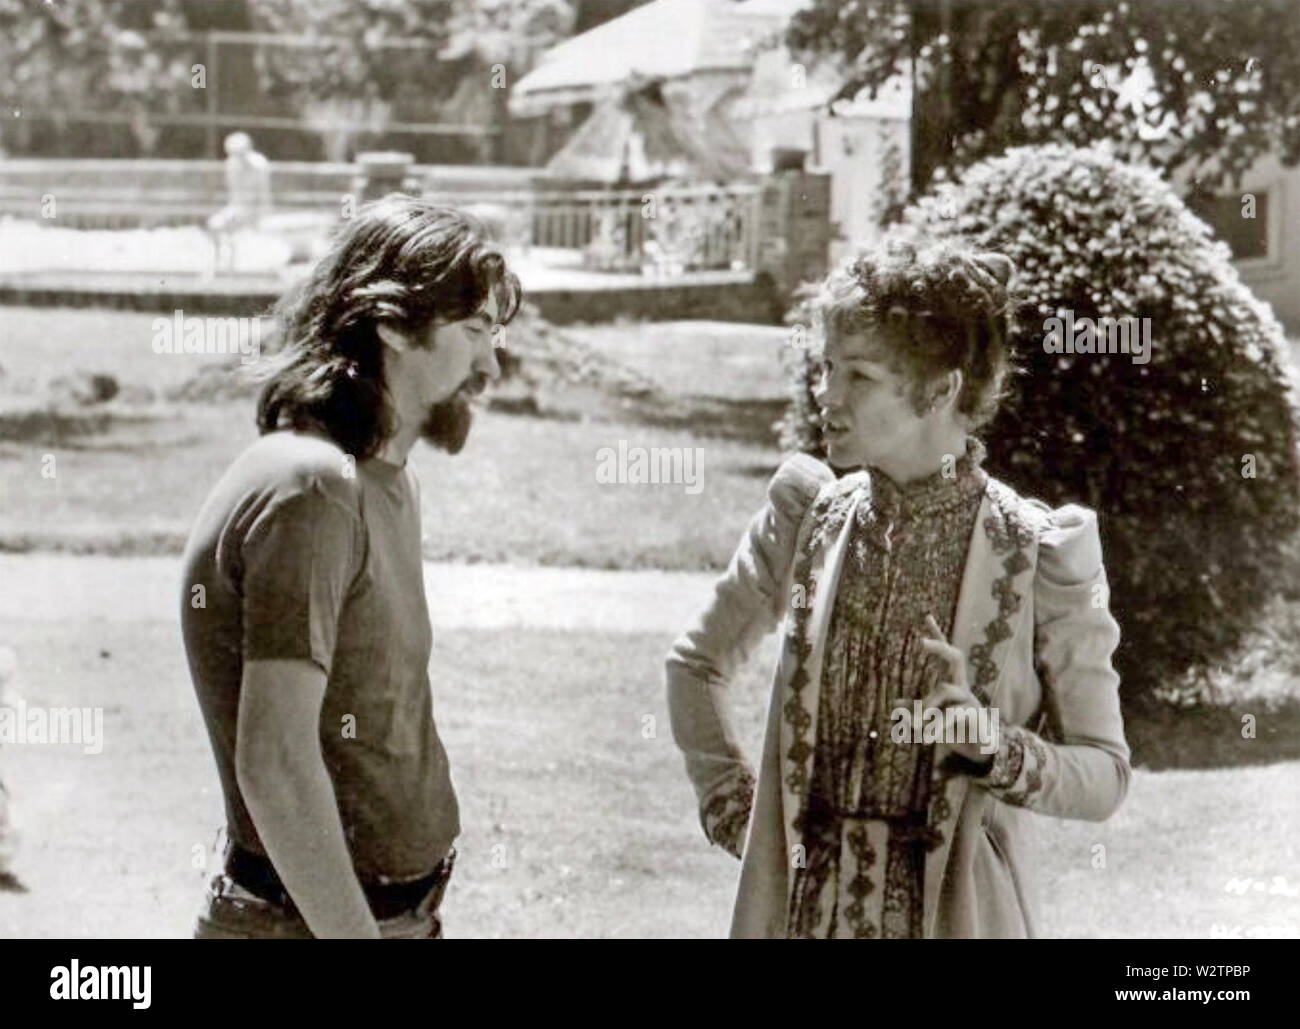 HEDDA 1975 Bowden Productions film with Glenda Jackson  and Peter Eyre (?) Stock Photo